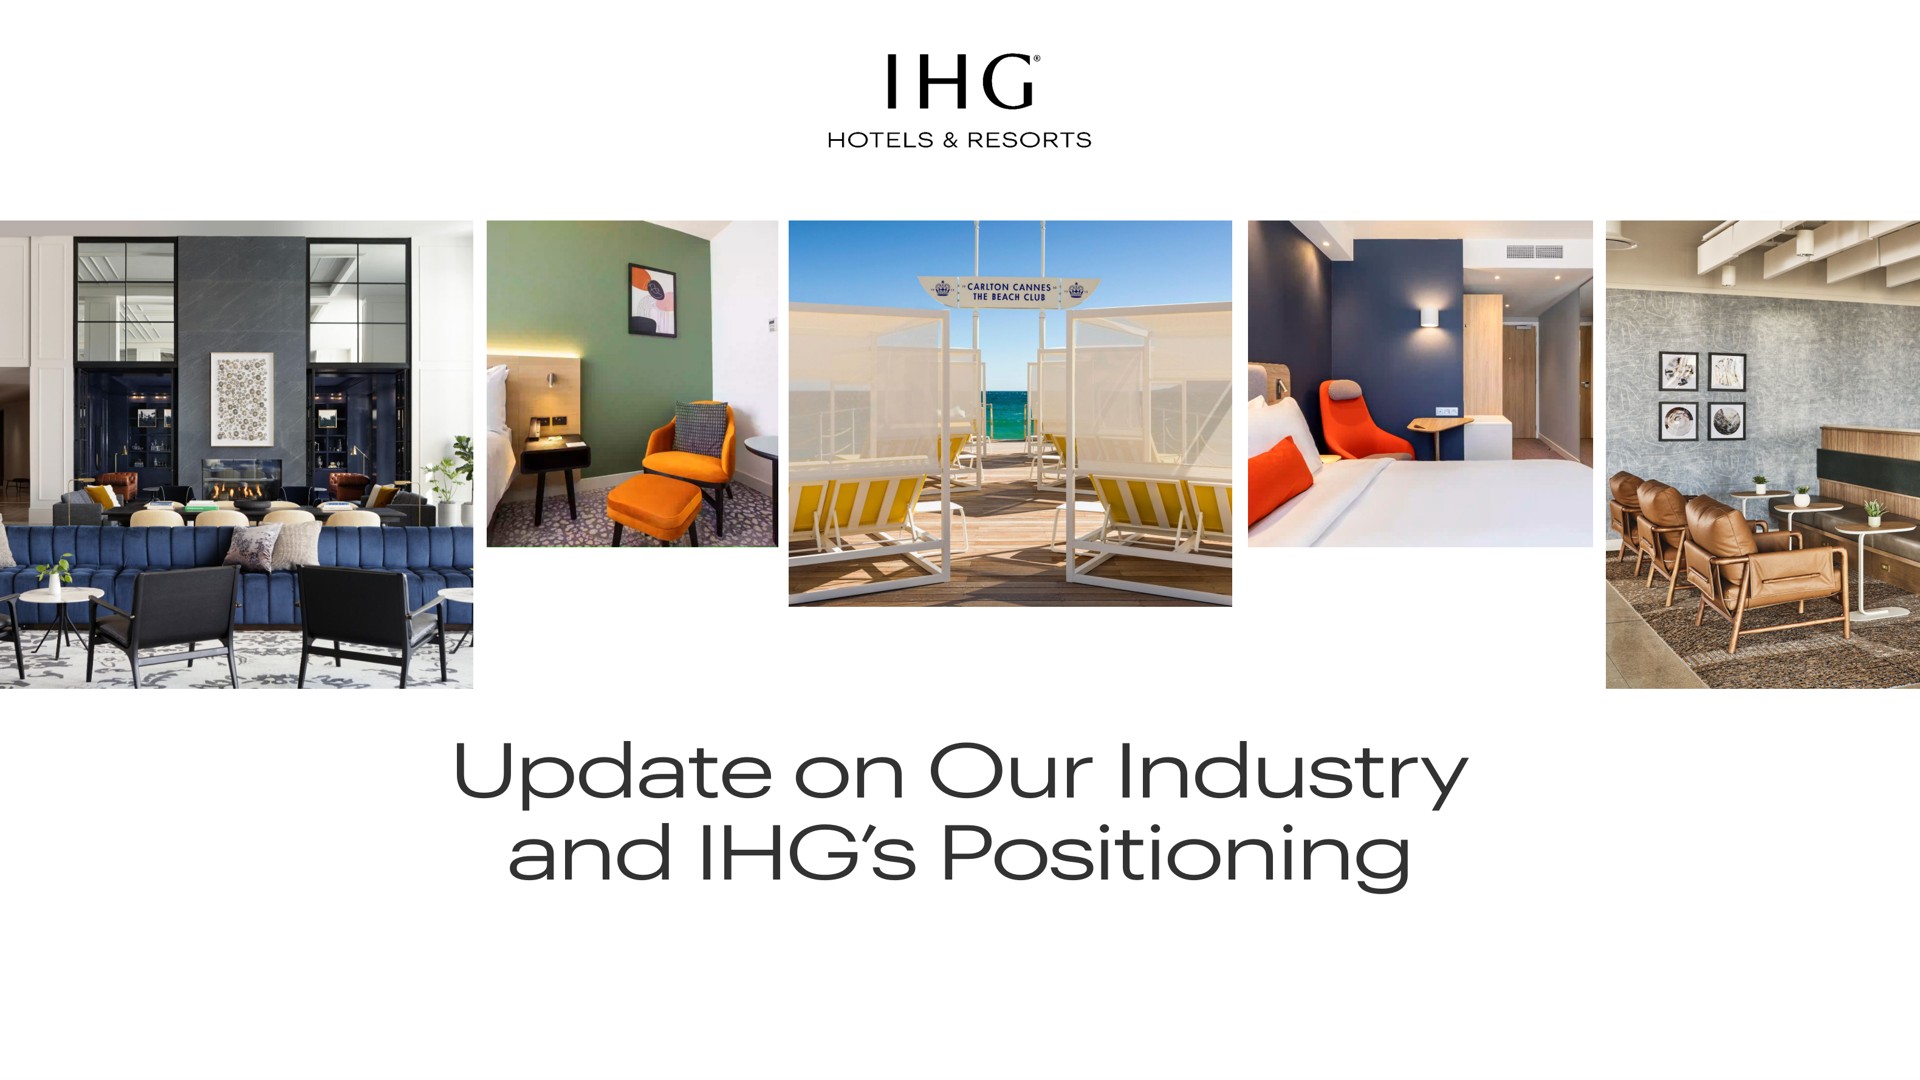 update on our industry and positioning | IHG Hotels